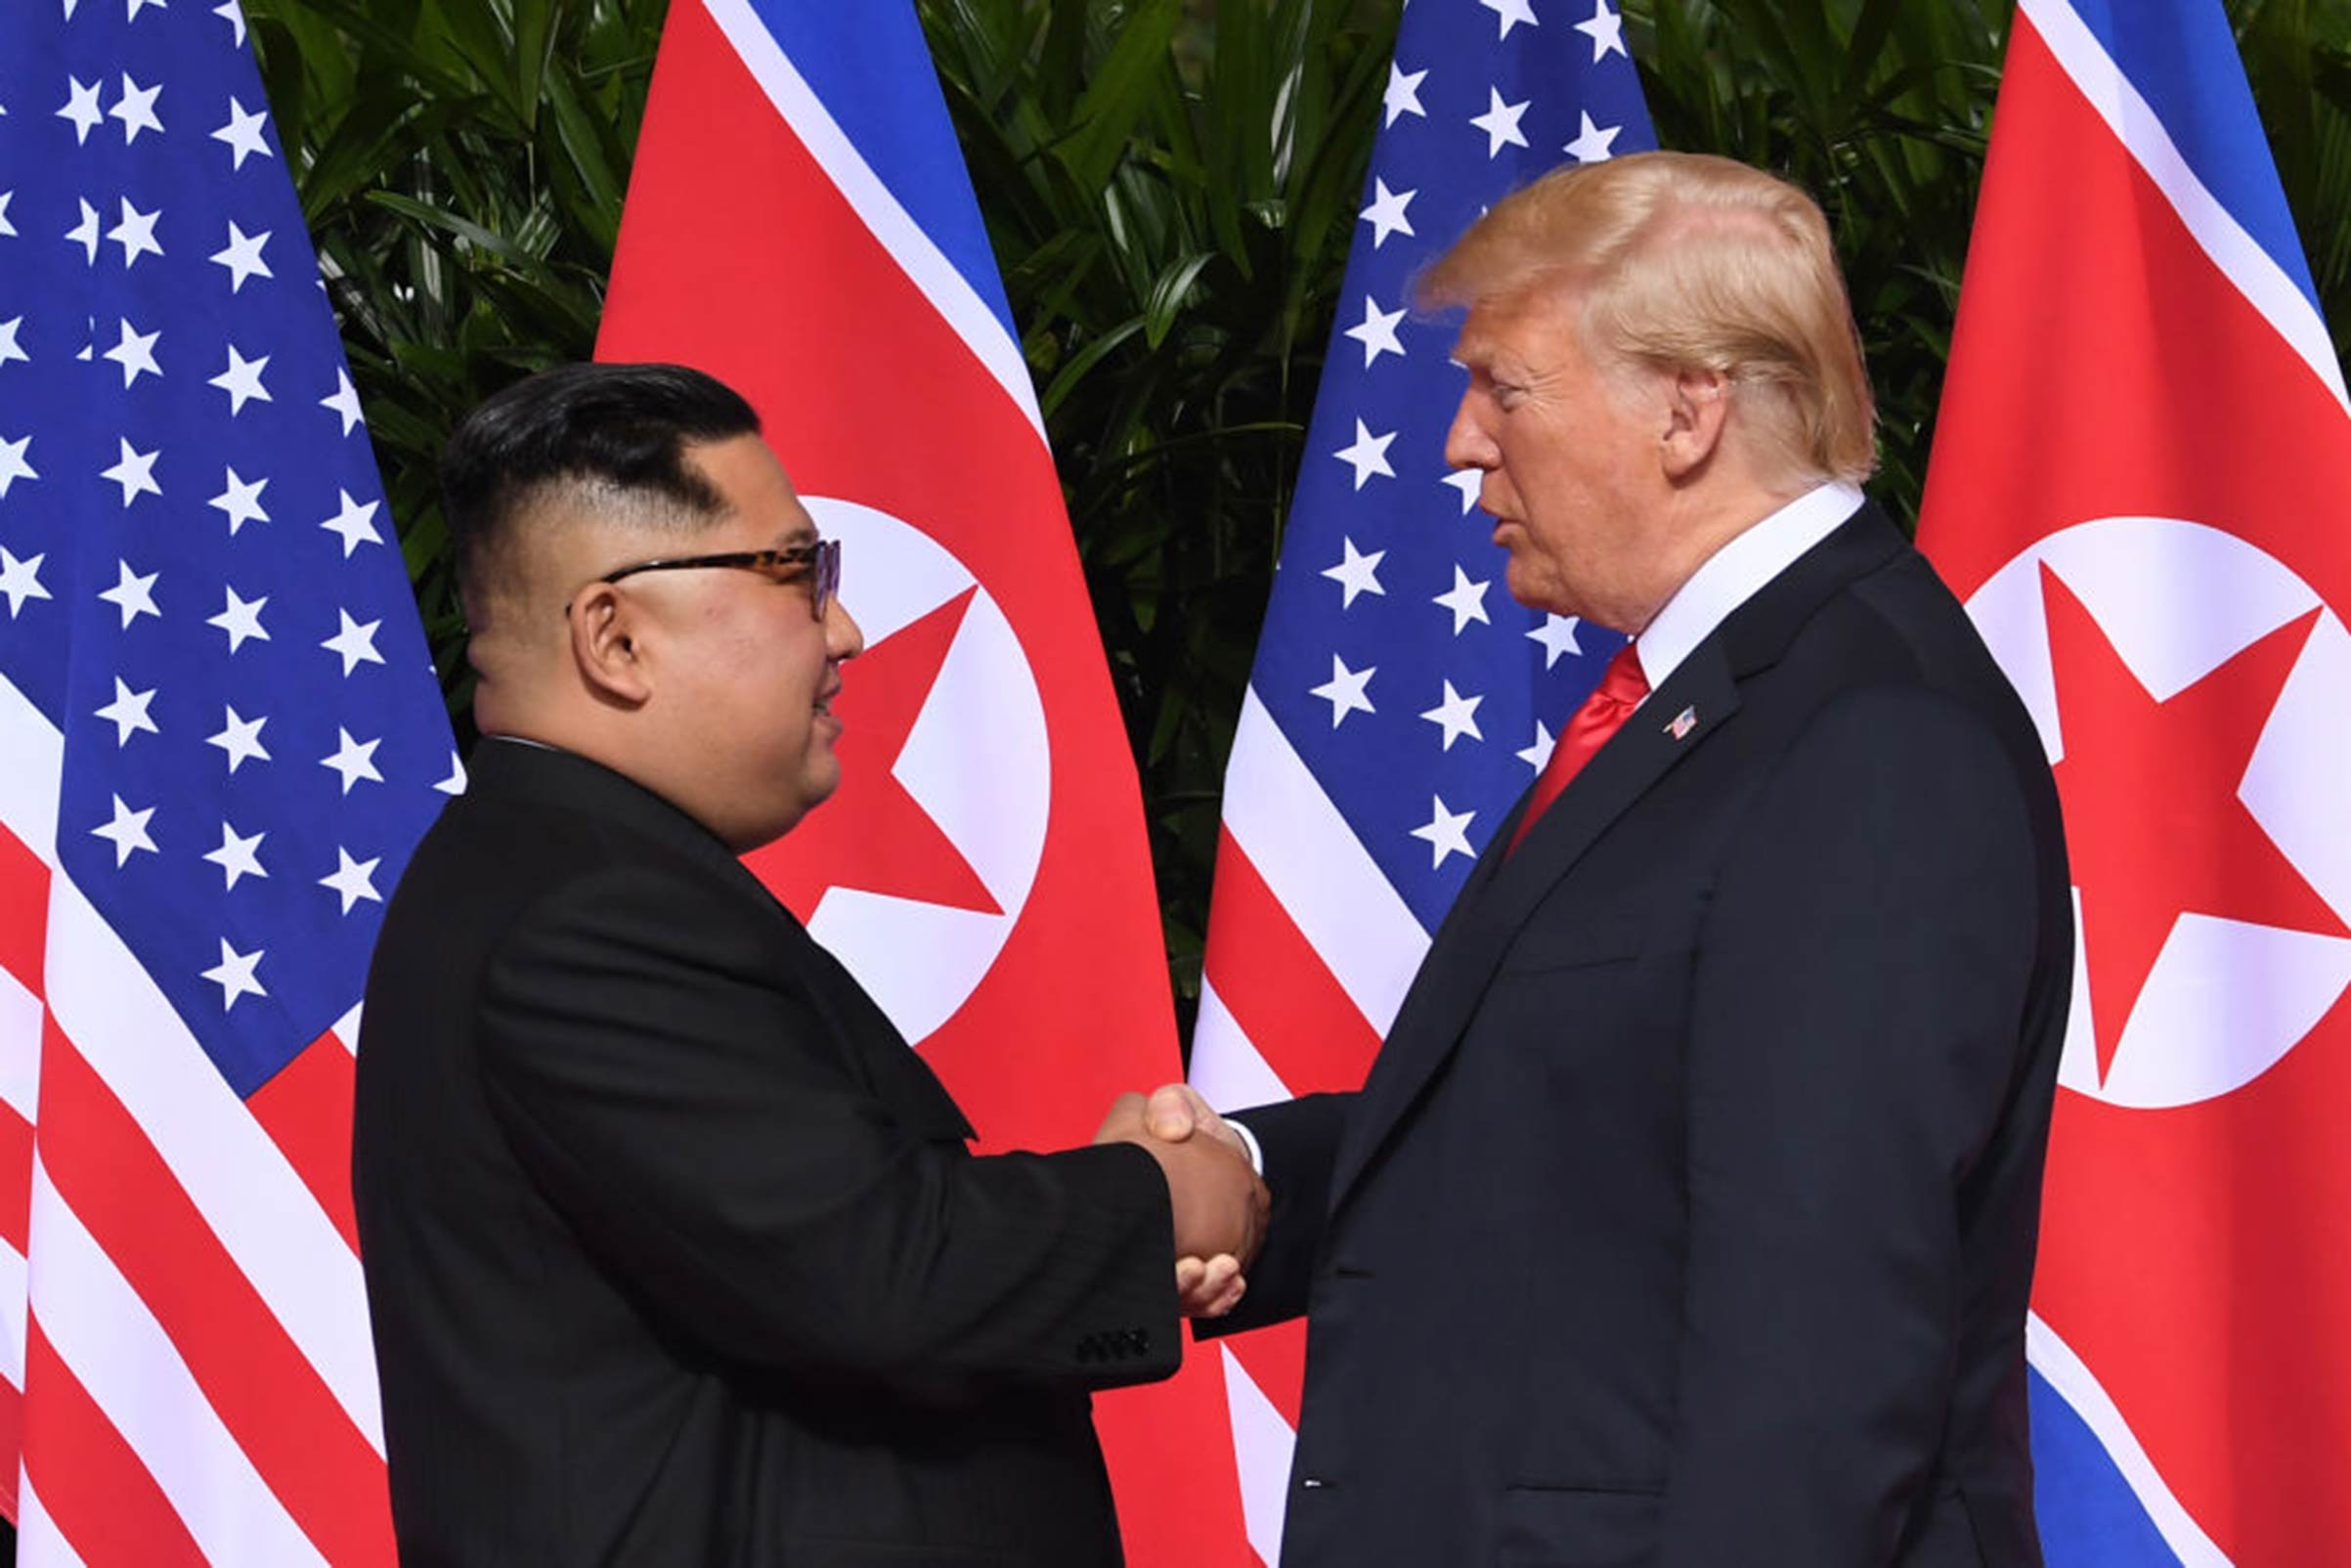 The President of the United States Donald Trump and North Korea's leader Kim Jong Un shake hands following a signing ceremony during their historic U.S.-North Korea summit on Sentosa island in Singapore on June 12, 2018. (Saul Loeb—AFP/Getty Images)